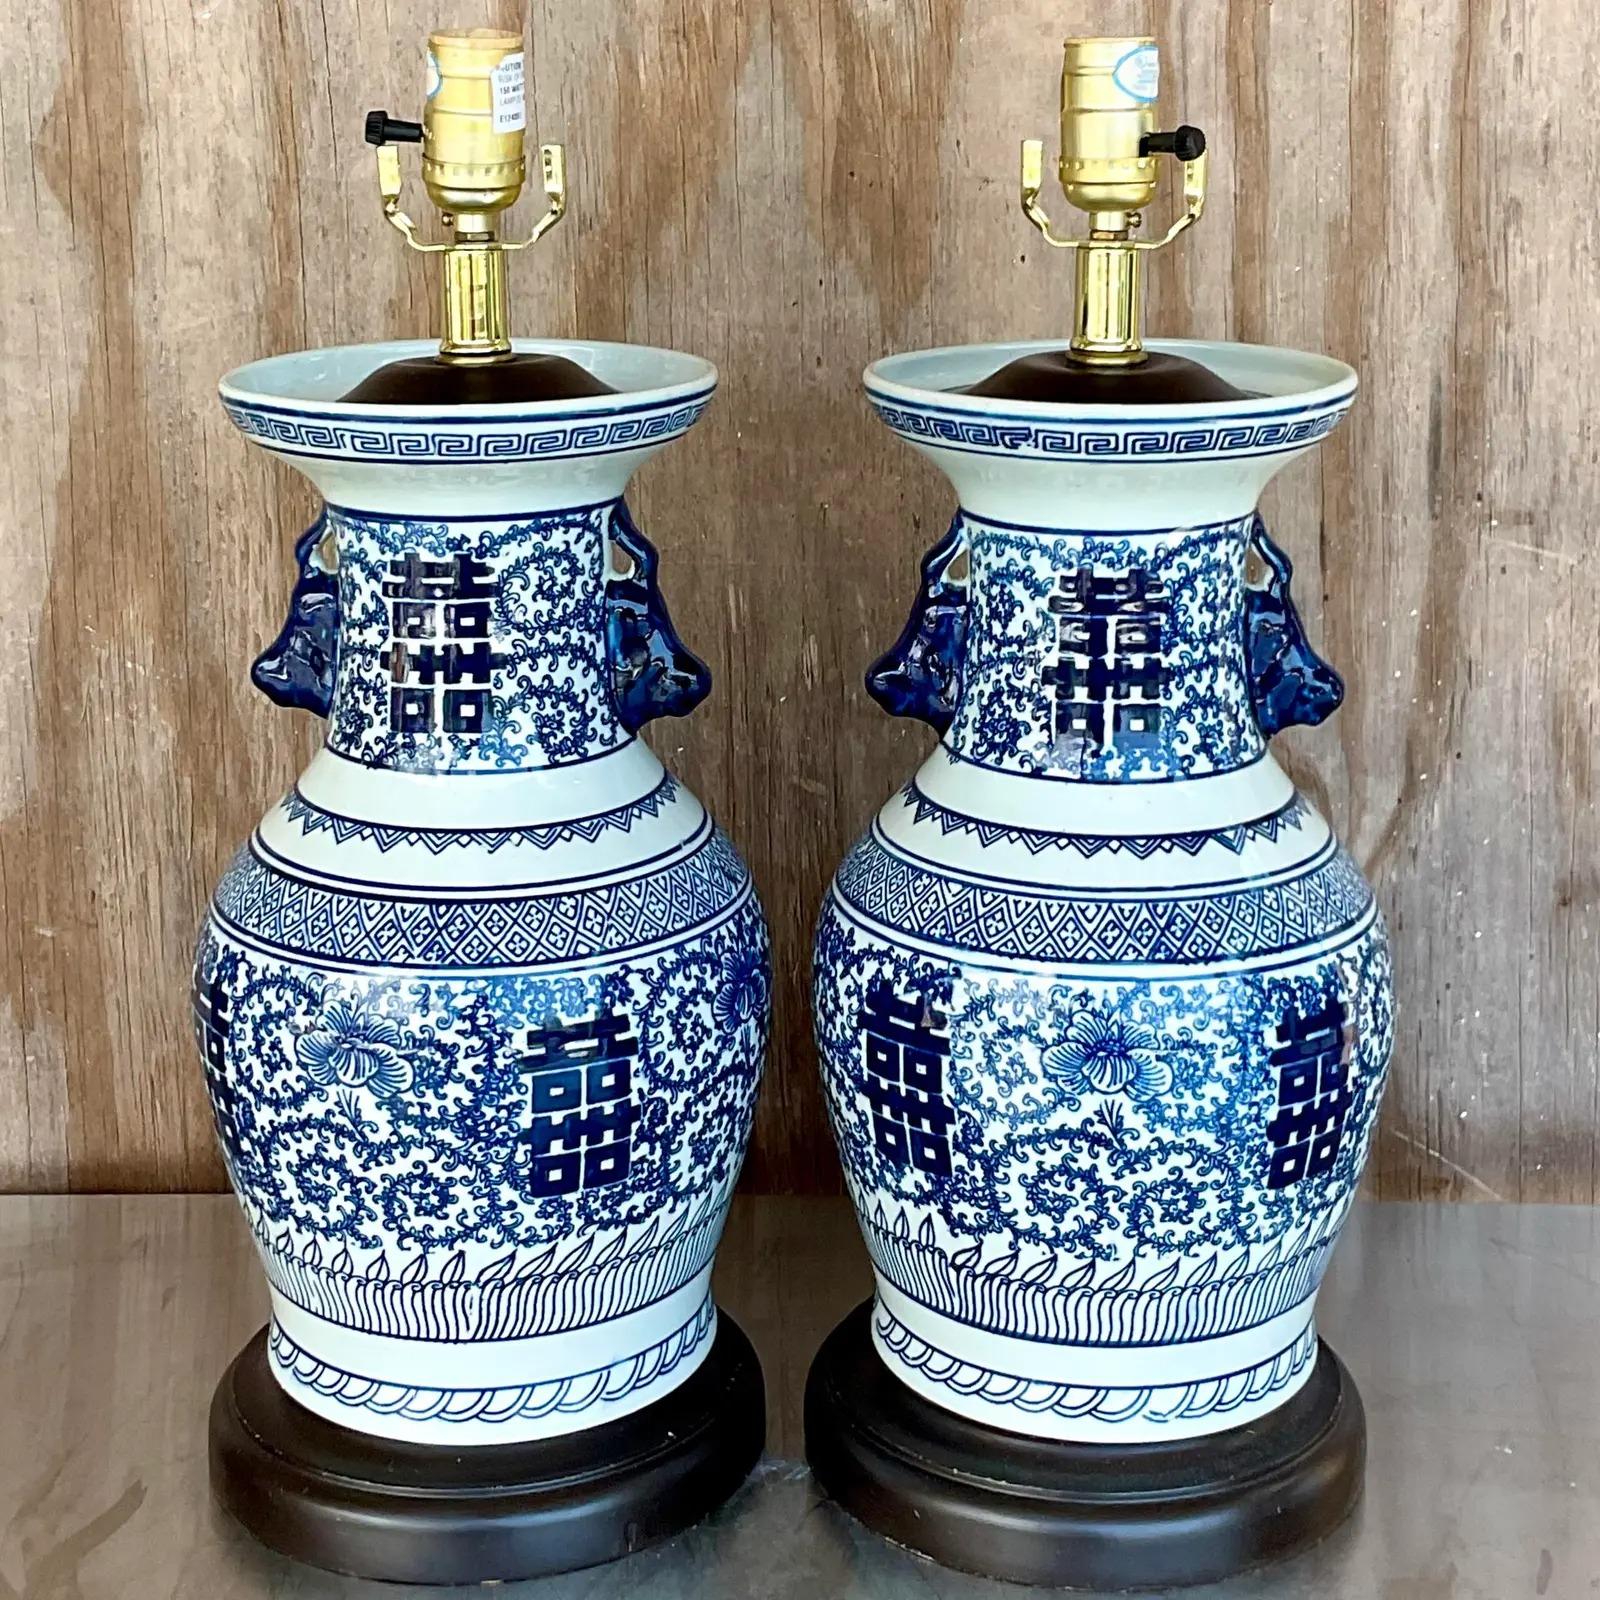 Vintage Asian Blue and White Glazed Ceramic Lamps - a Pair In Good Condition For Sale In west palm beach, FL